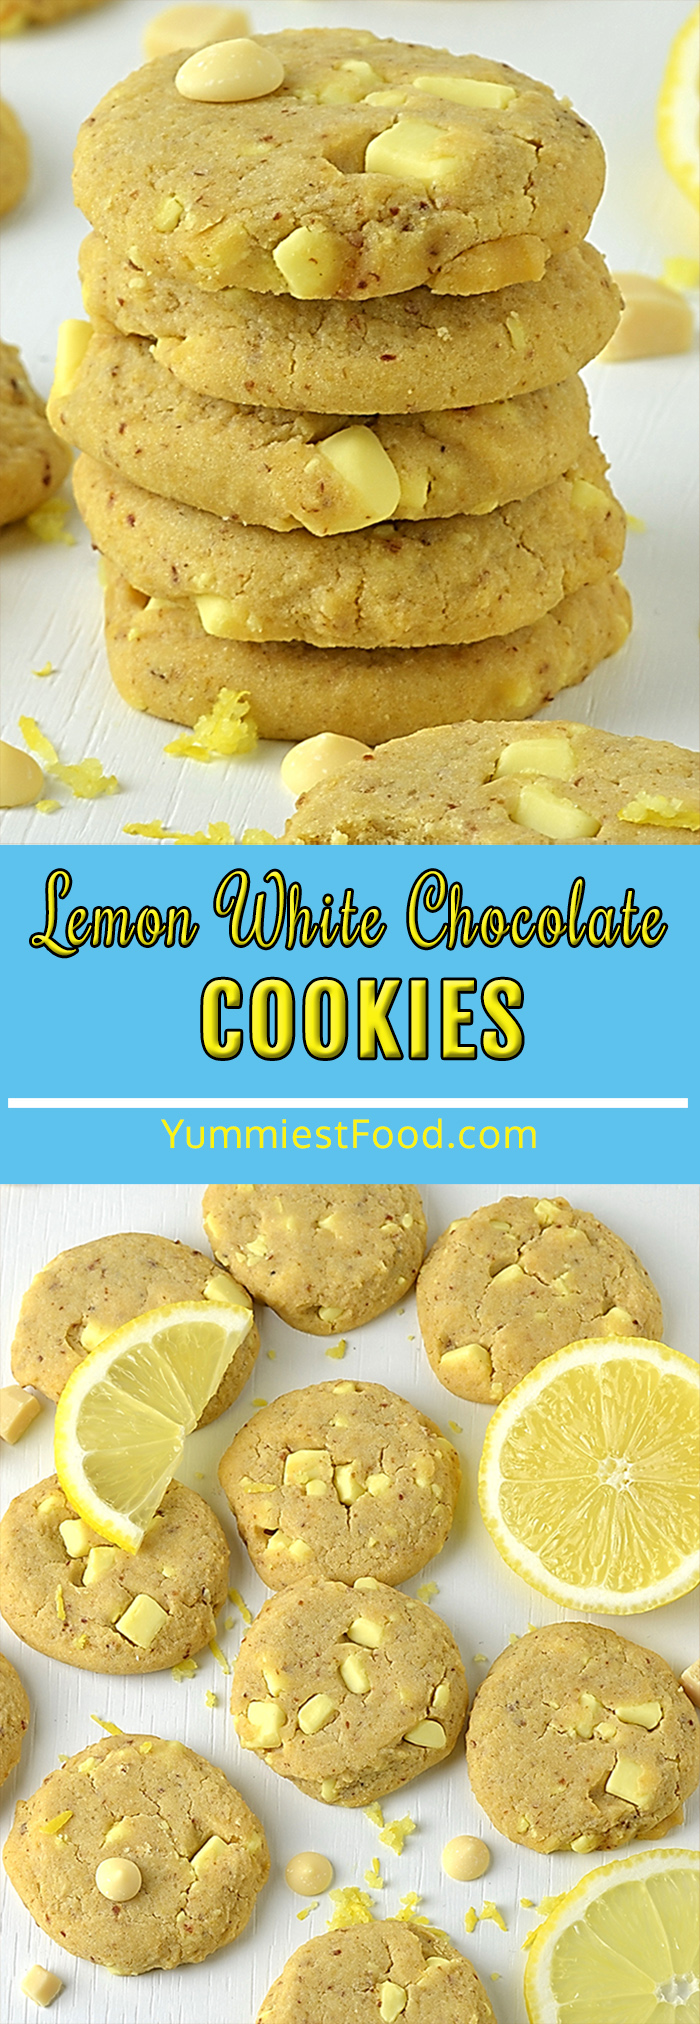 Lemon White Chocolate Cookies are super soft, packed with white chocolate chips, and bursting with the flavor of fresh lemon. This is an easy cookie recipe and makes for a quick lemon dessert!